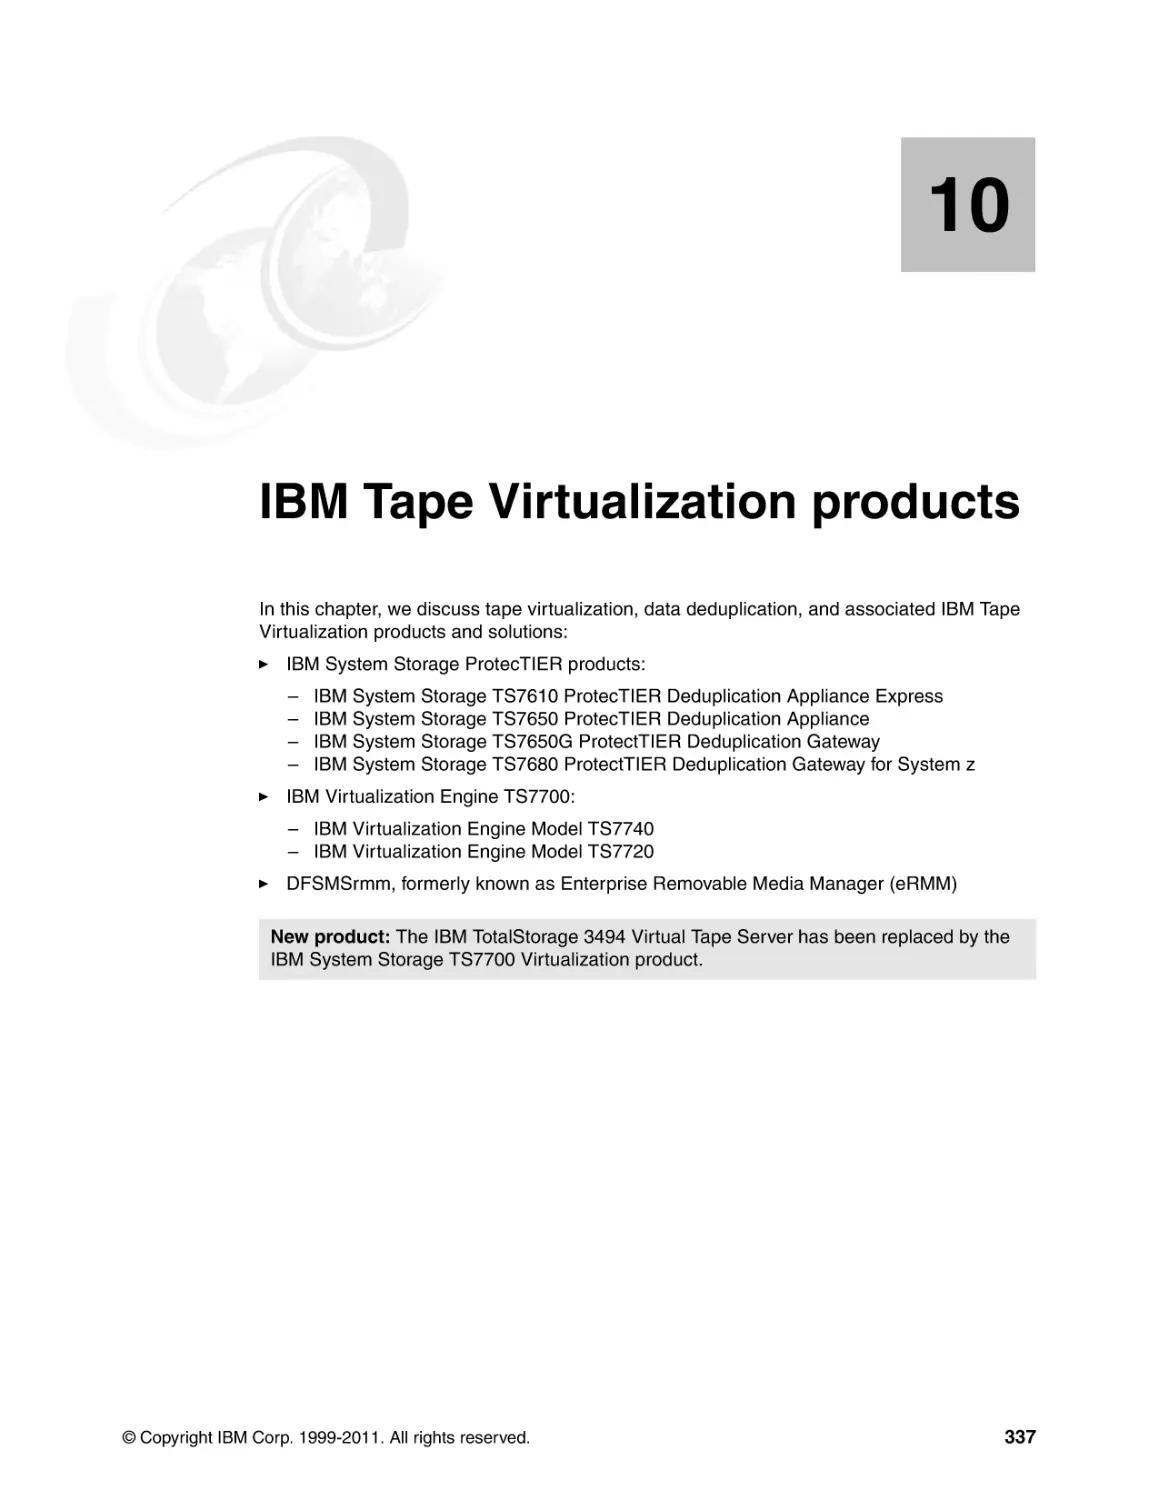 Chapter 10. IBM Tape Virtualization products